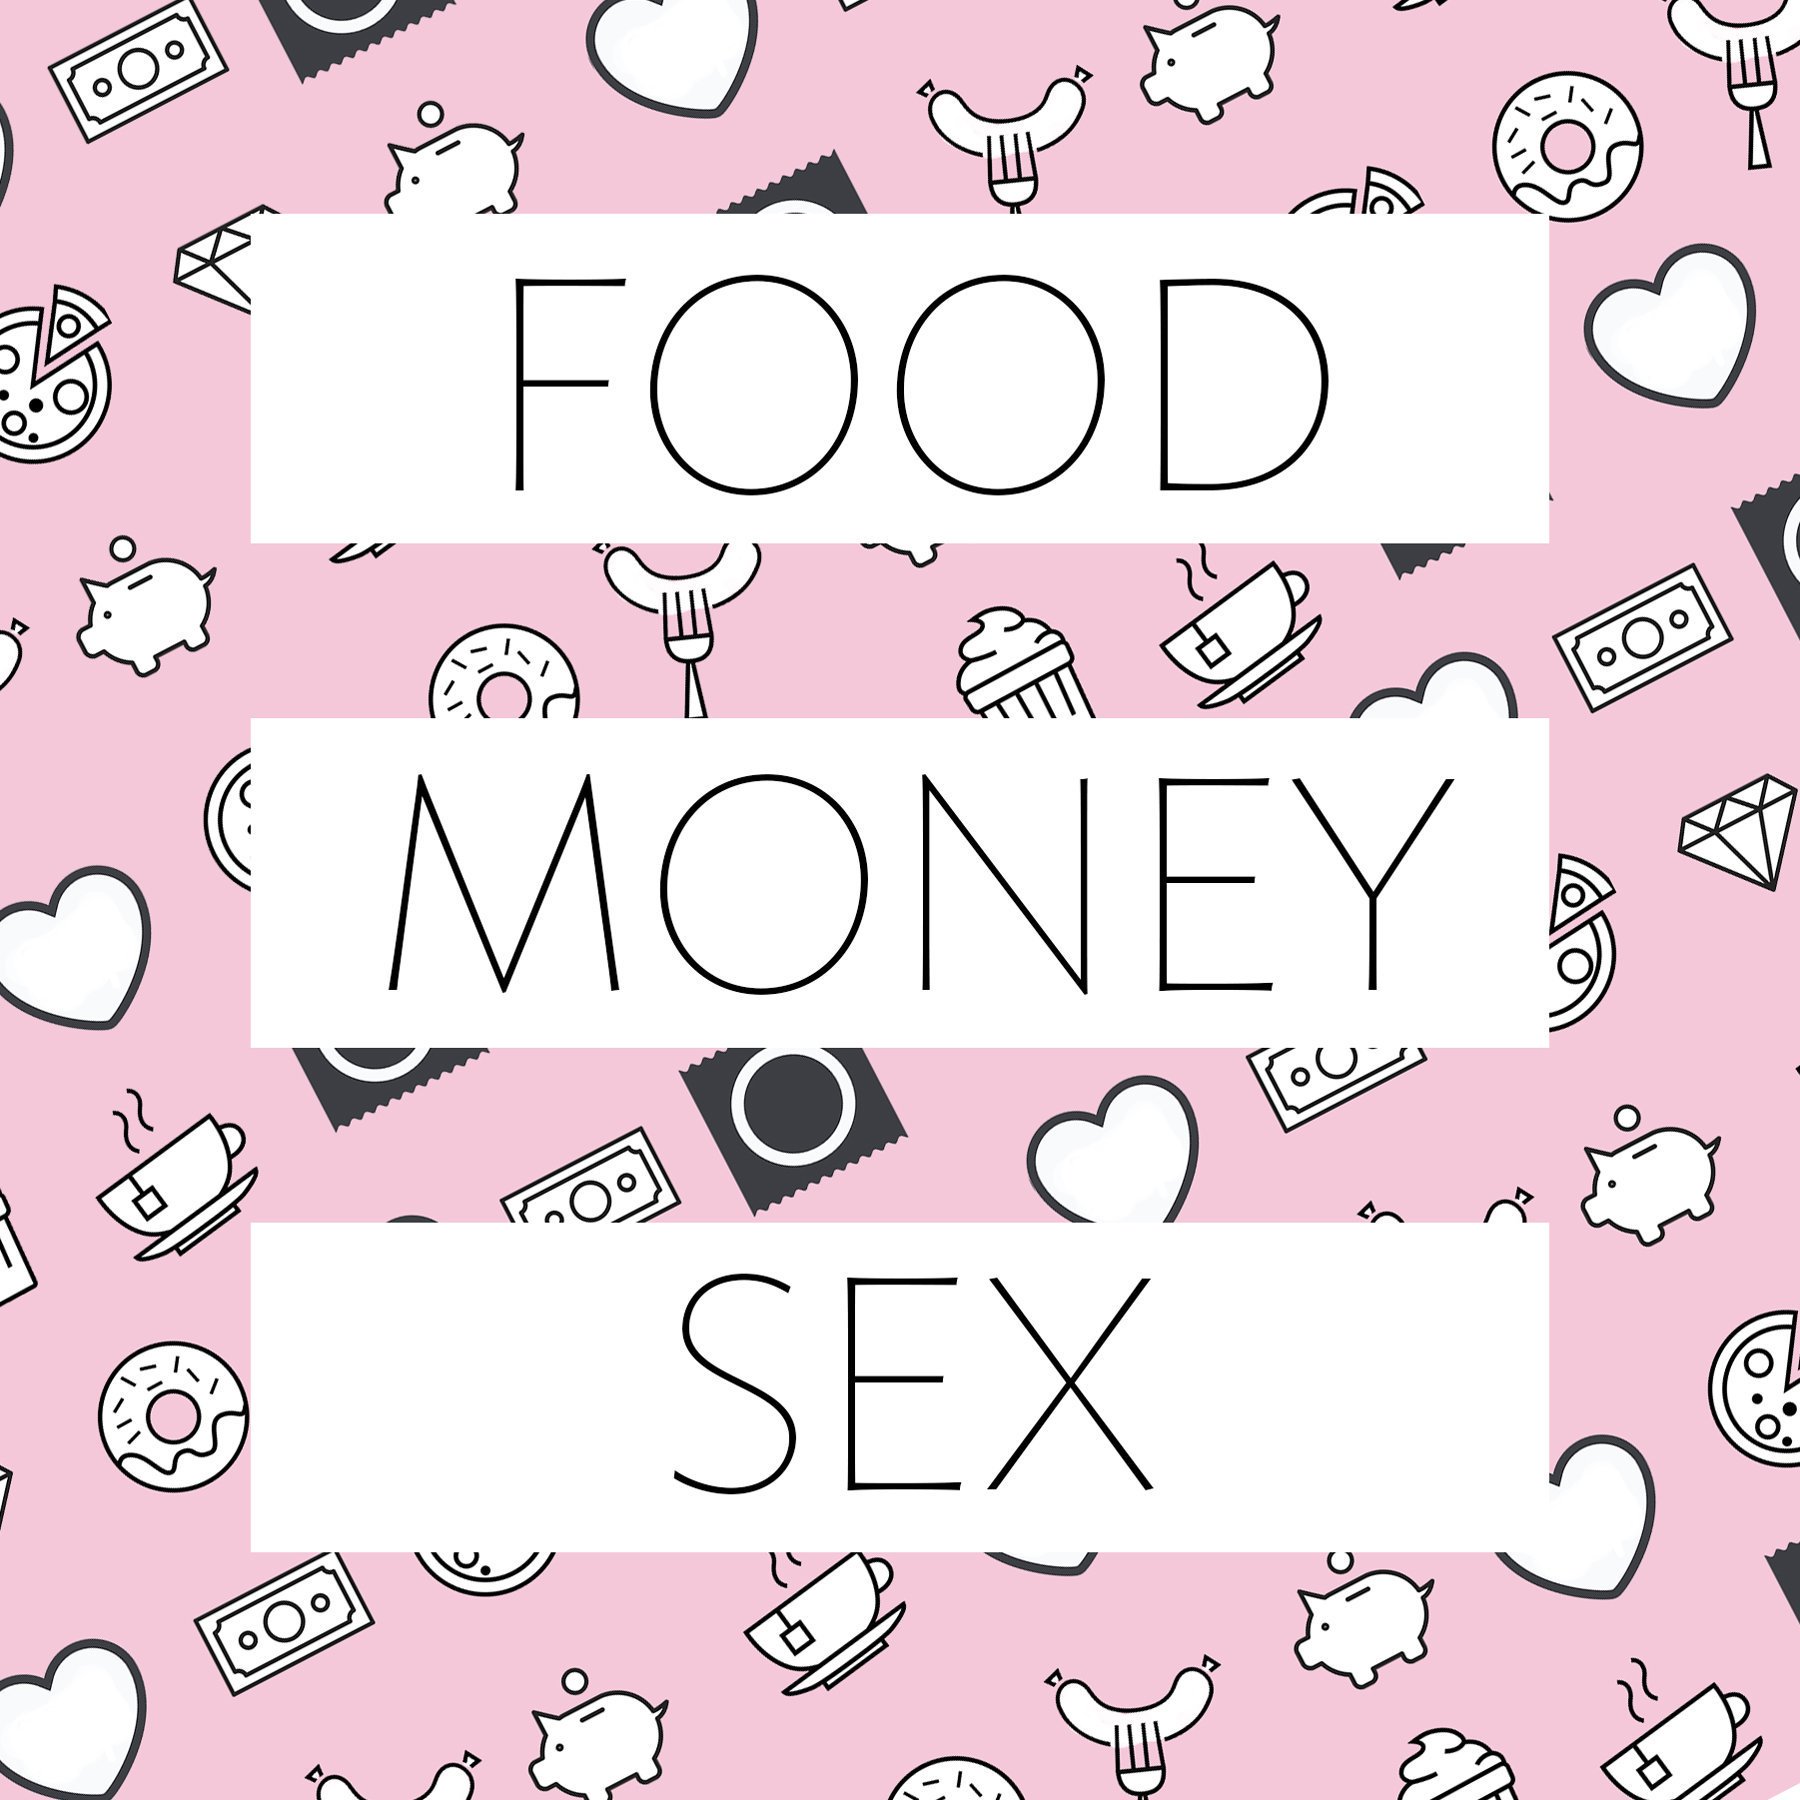 Food Money Sex A Married Couple Who Leave the Kids With the Grandparents and Take a Ton of Edibles